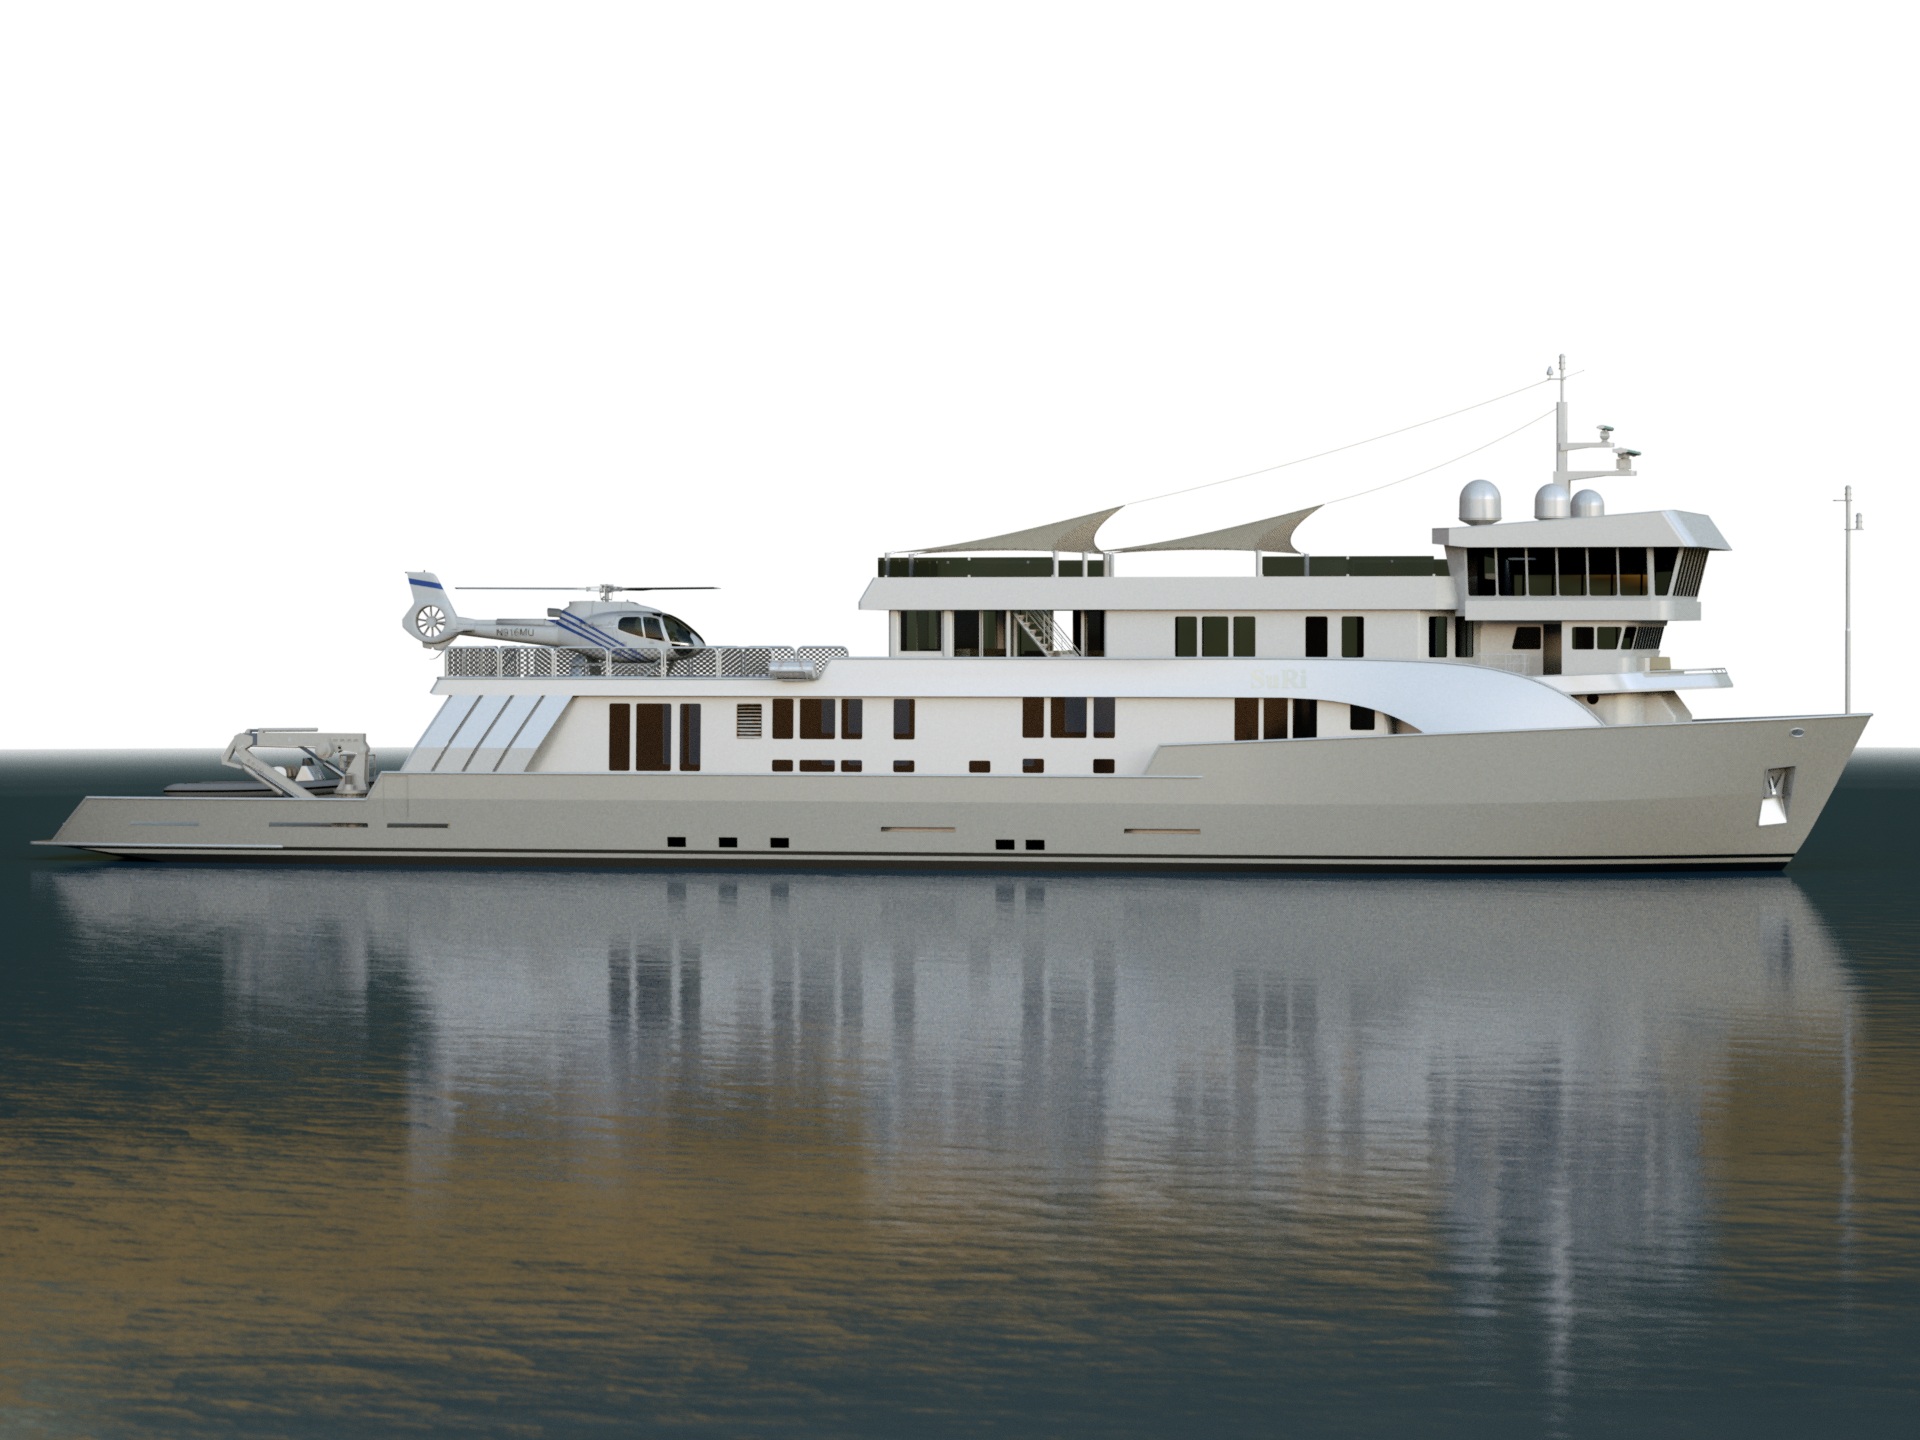 52m-Expedition-Yacht-SuRi-to-undergo-refit-and-extension-to-63m.jpg